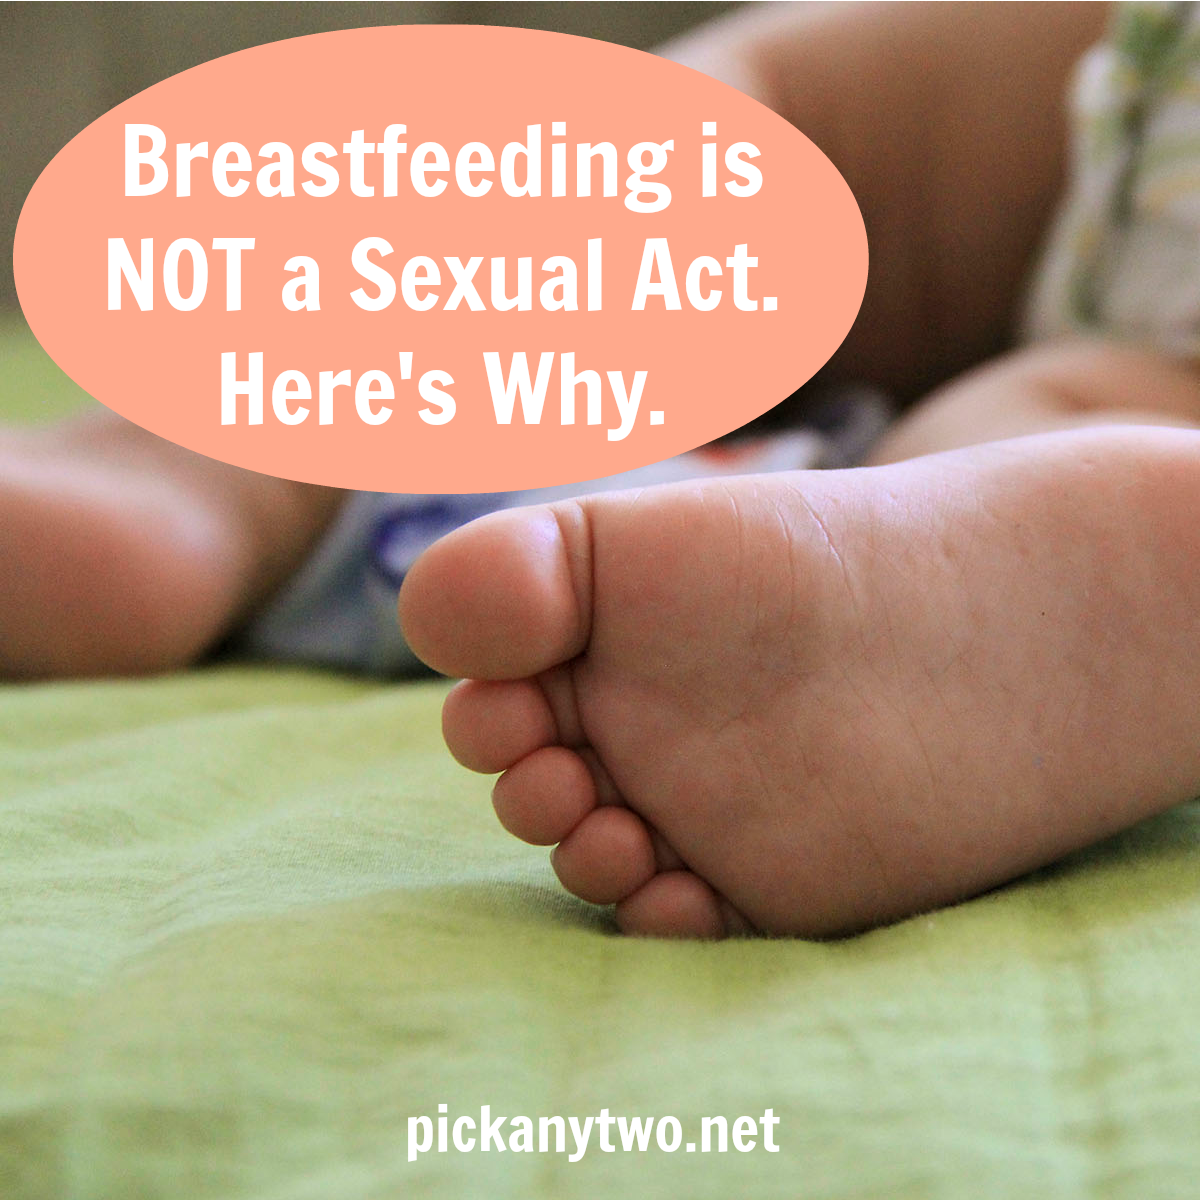 Breastfeeding is Not a Sexual Act